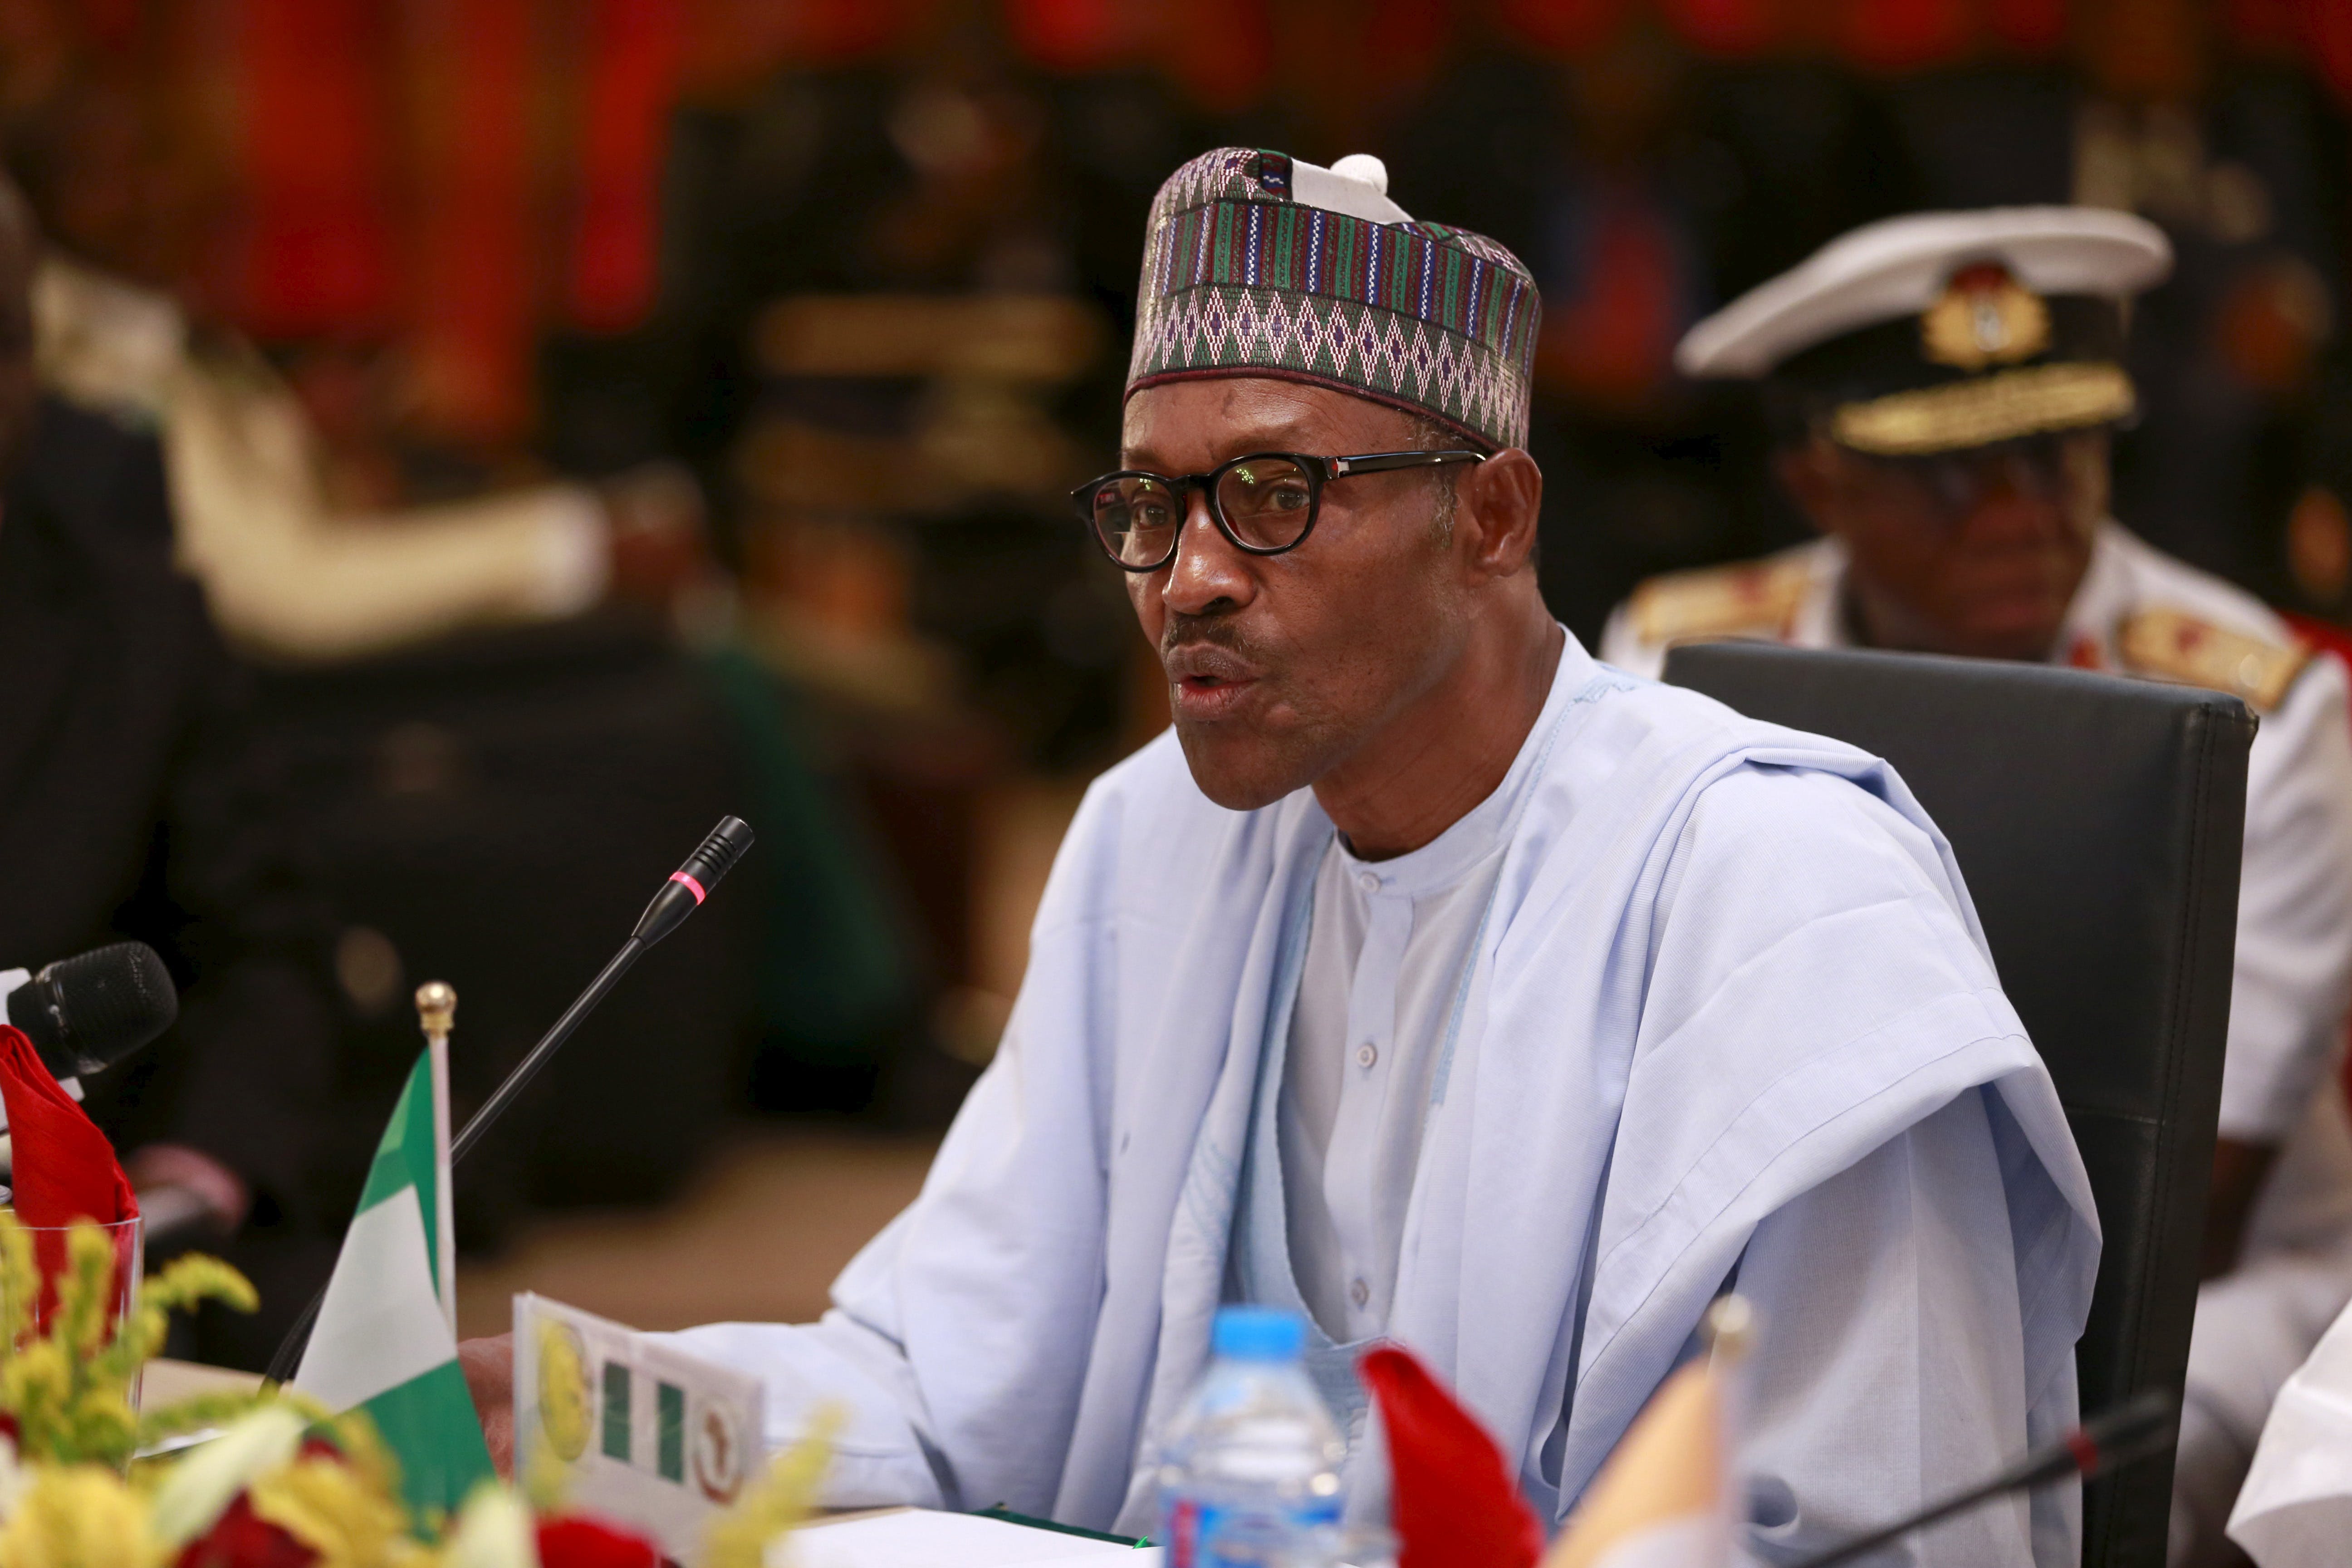 Nigeria's President Muhammadu Buhari speaks during opening ceremony for Summit of Heads of State and Governments of the Lake Chad Basin Commission at presidential wing of Nnamdi Azikiwe International 